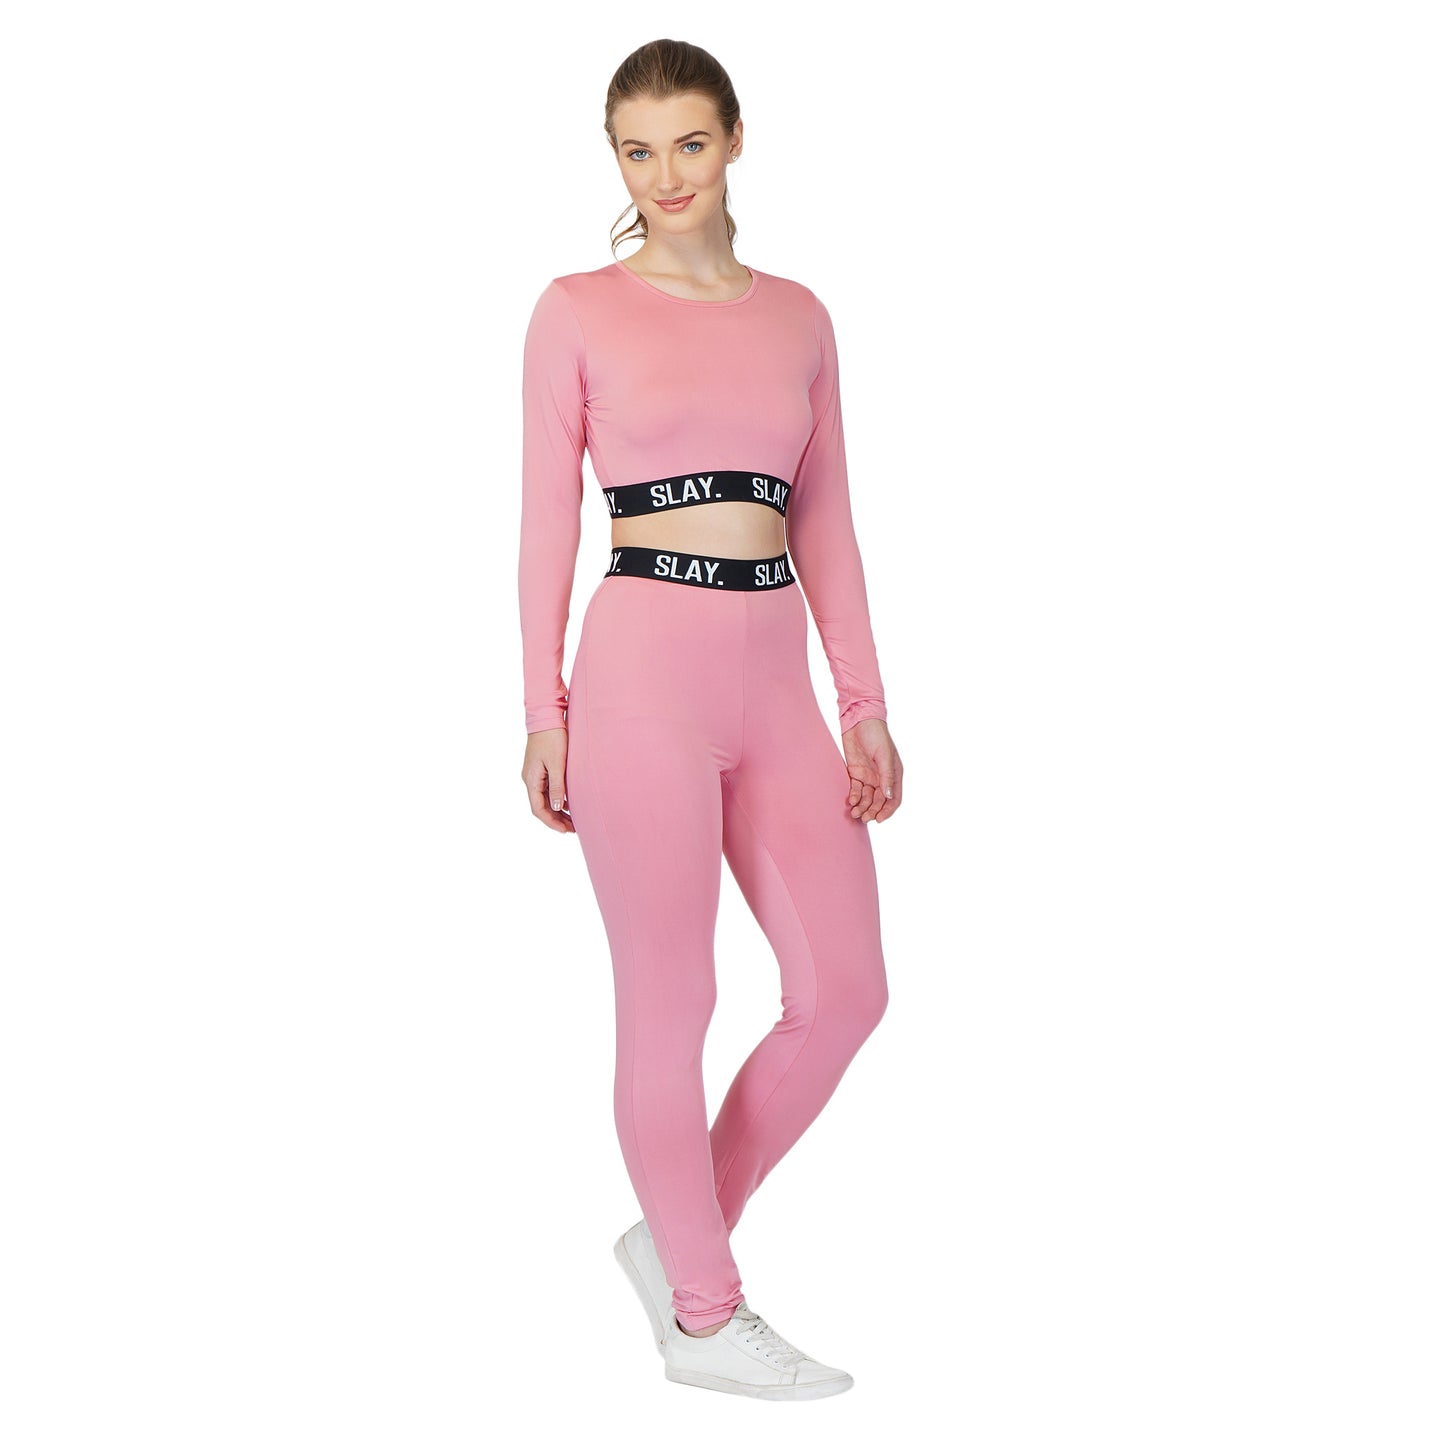 SLAY. Sport Women's Activewear Full Sleeves Crop Top And Pants Co-ord Set Pink